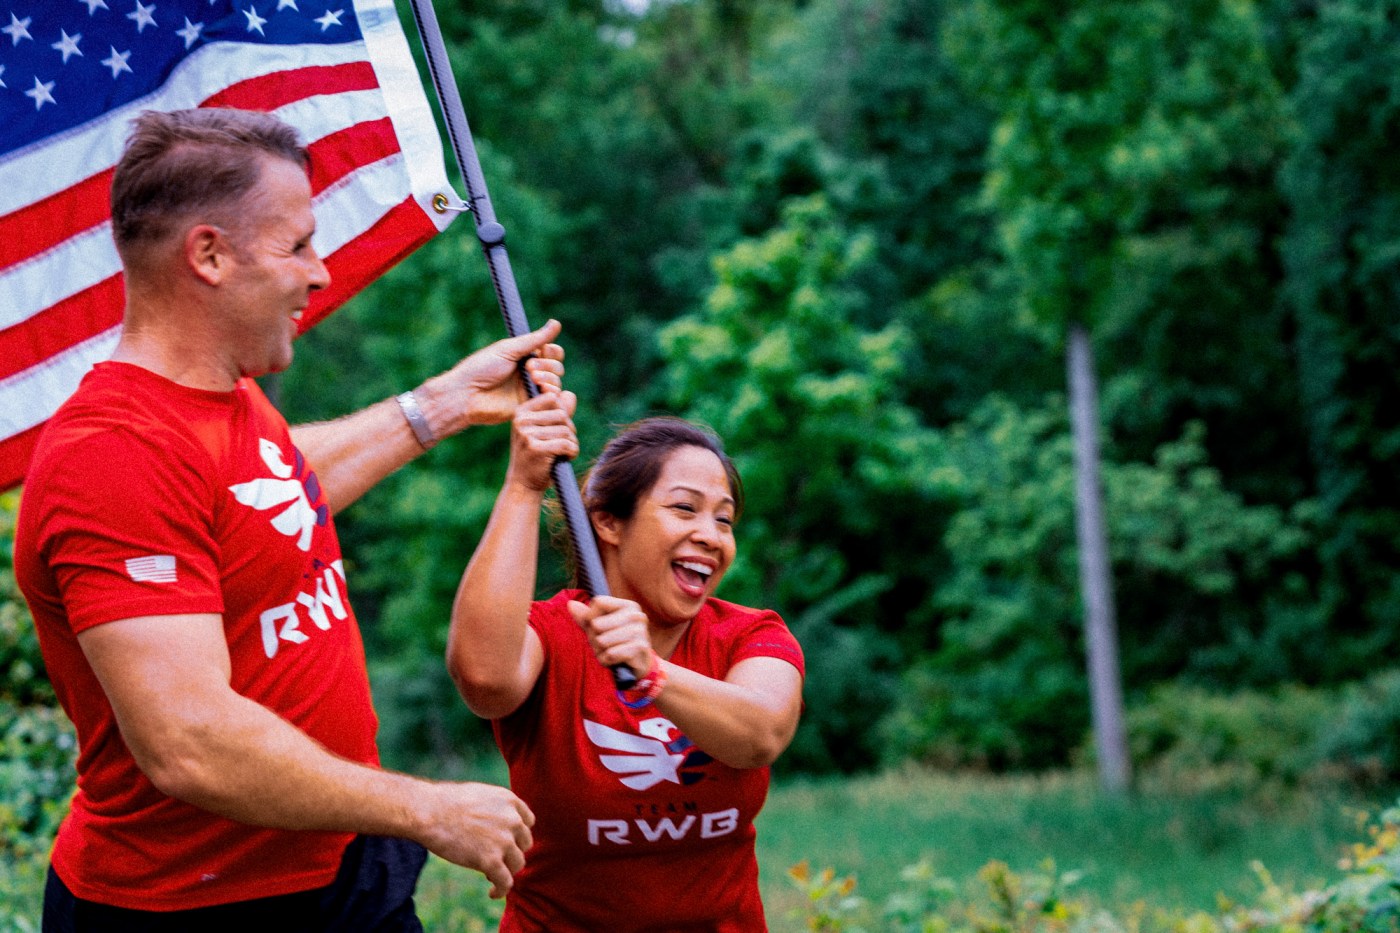 woman and man running with american flag representing team rwb